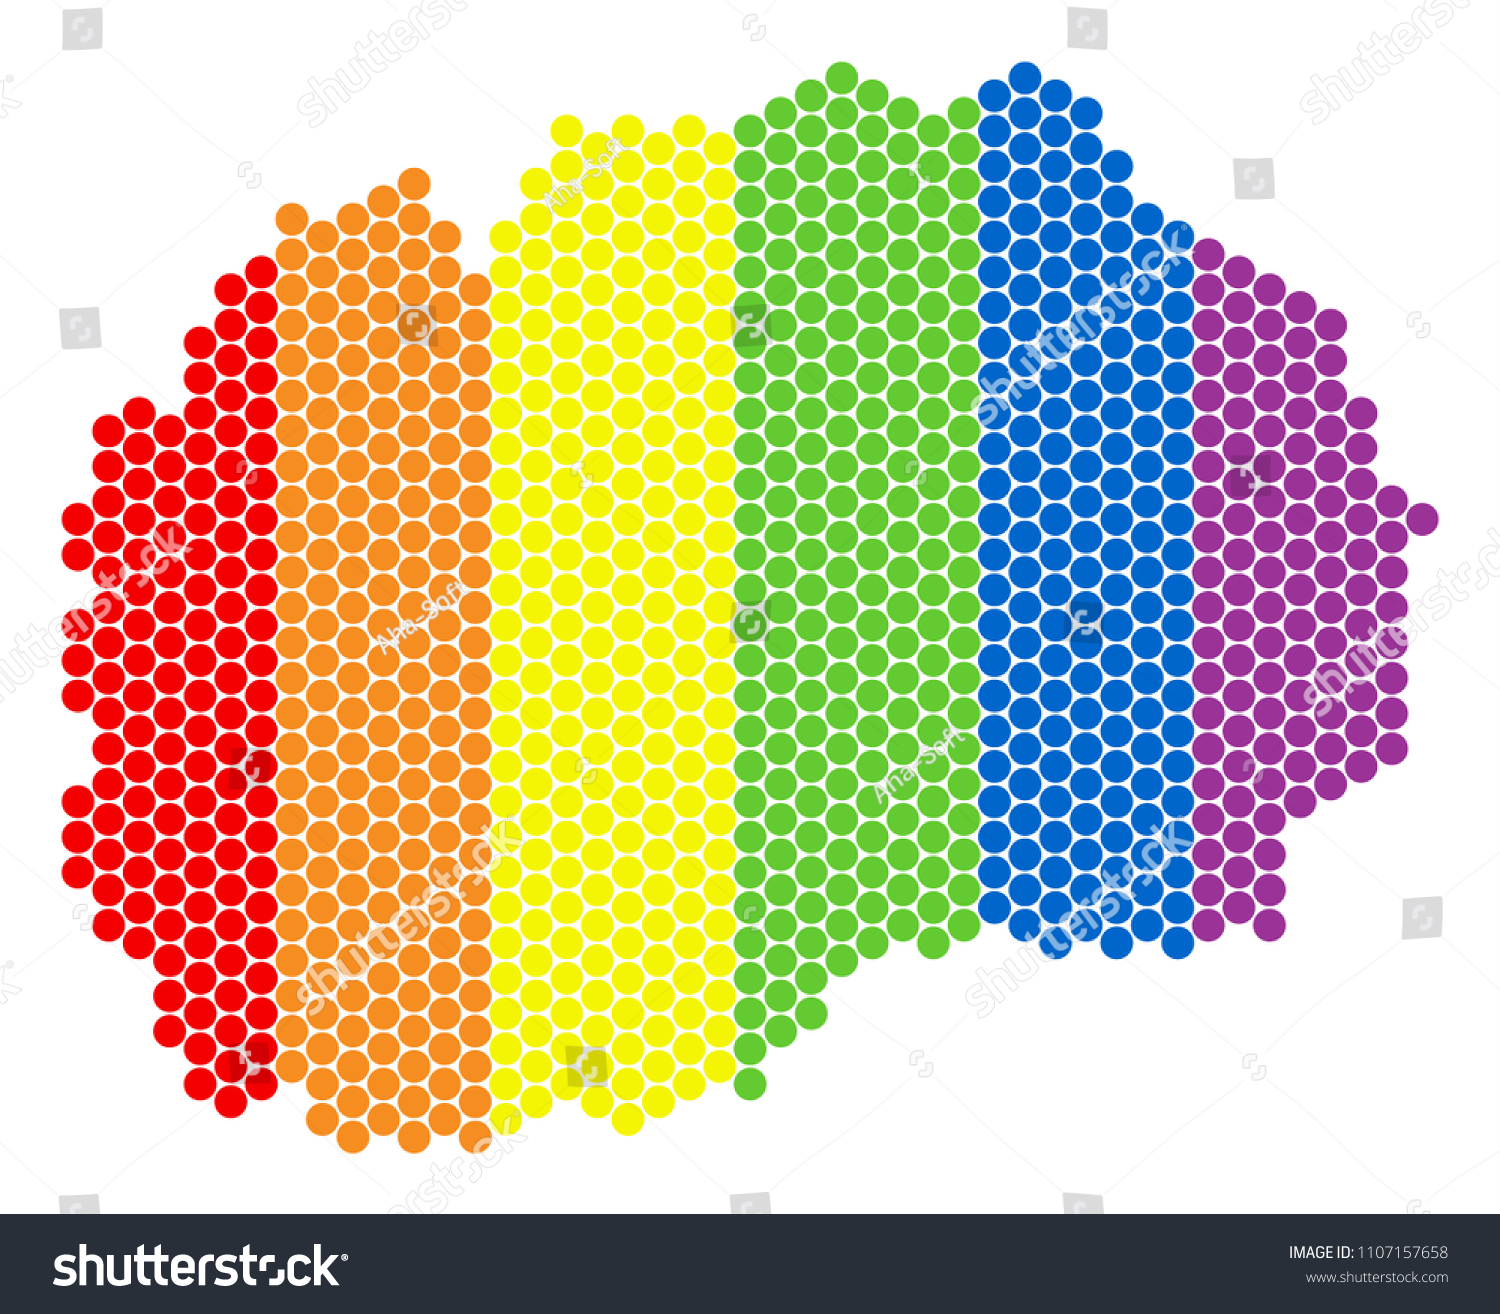 A Dotted Lgbt Makedonia Map For Lesbians Gays Royalty Free Stock Vector 1107157658 9918